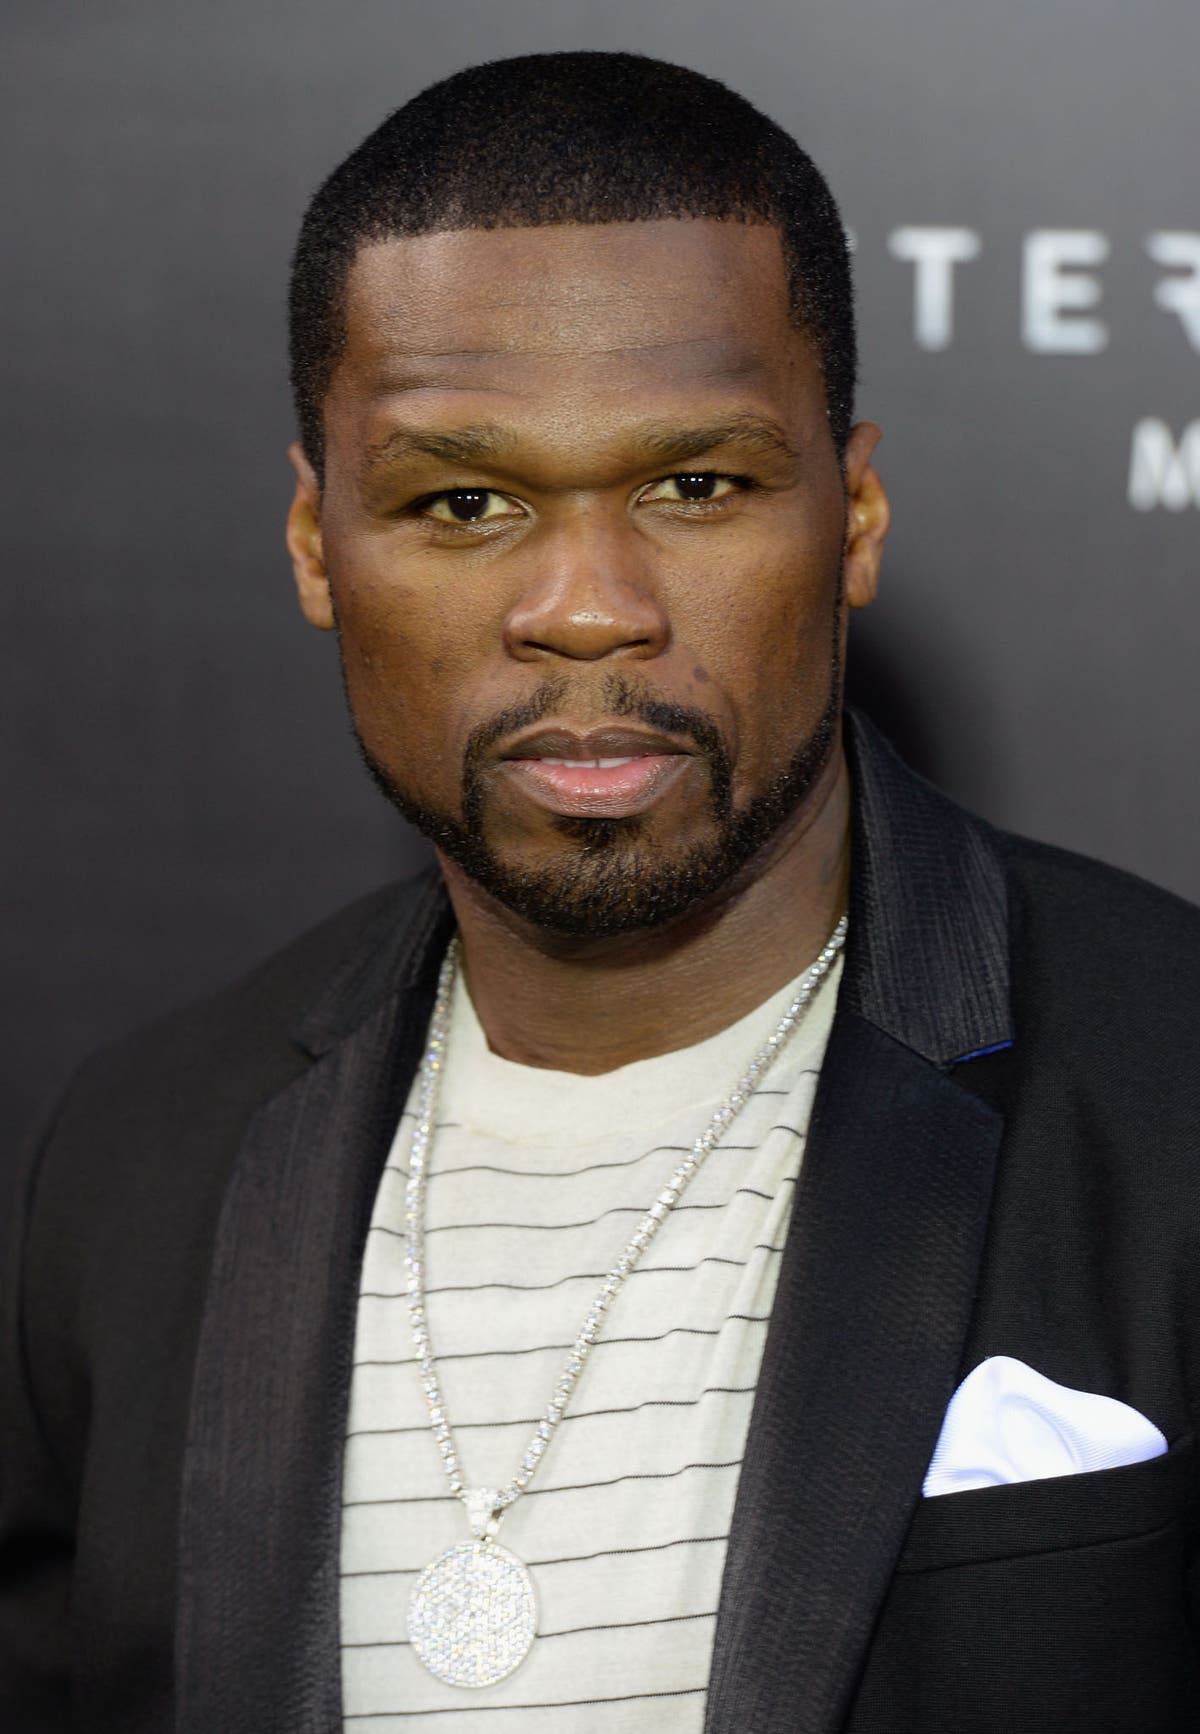 50 Cent arrested after girlfriend claims he attacked her and vandalised ...